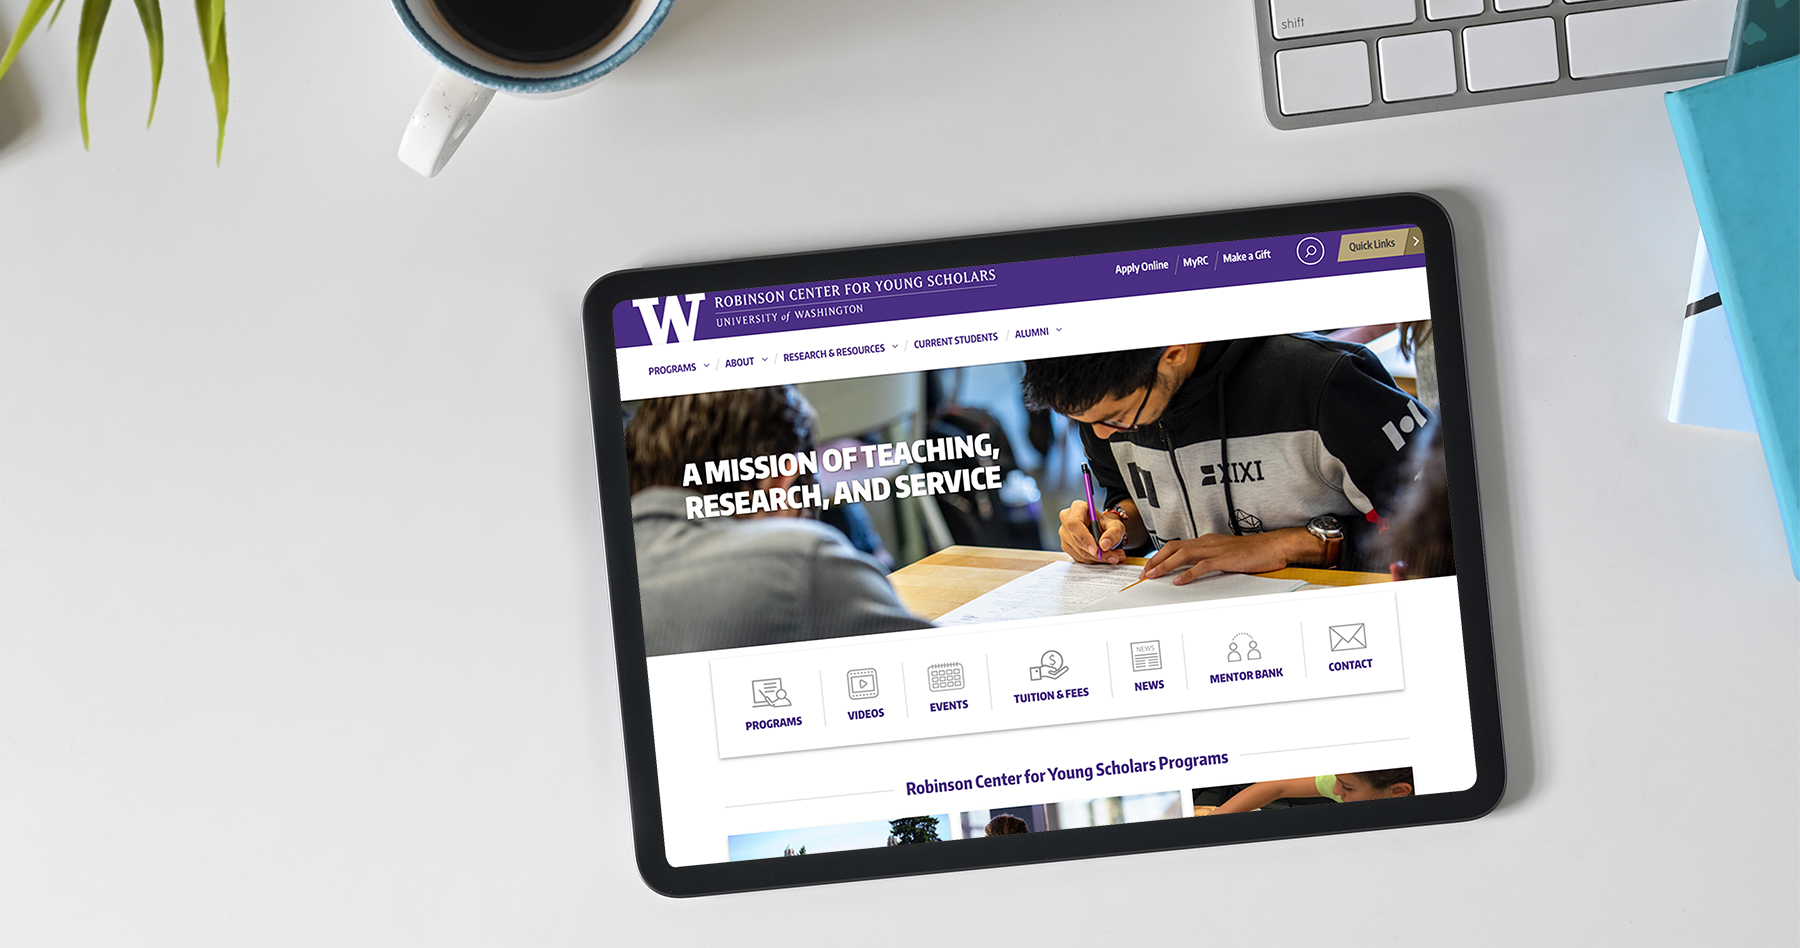 Ipad with responsive website design for the UW Robinson Center for Young Scholars